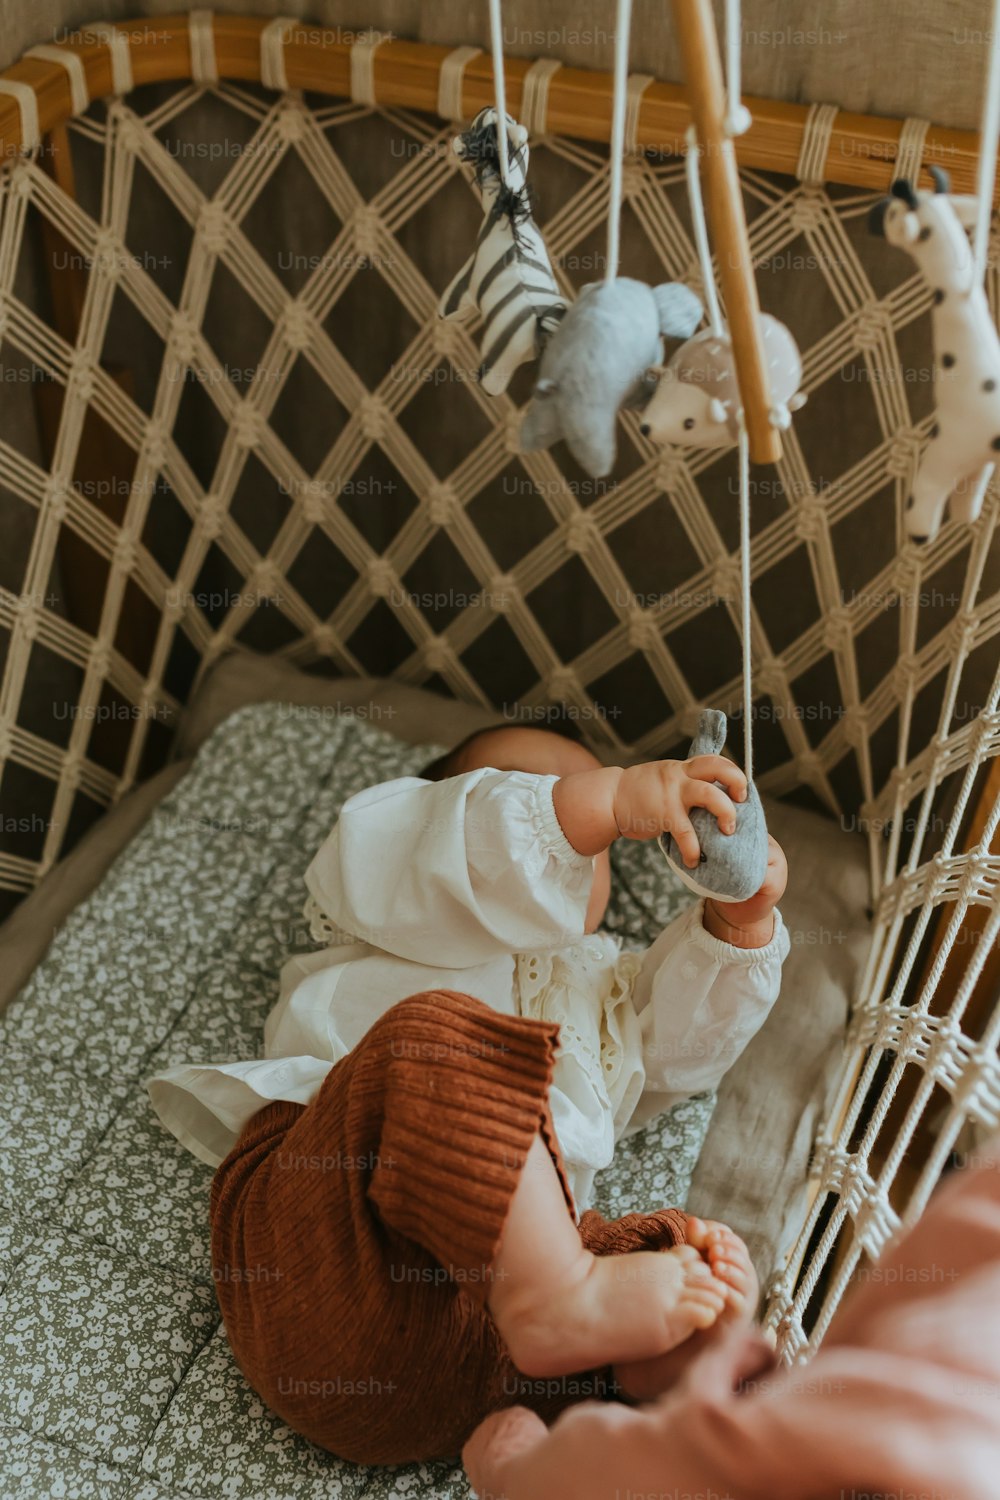 a baby laying in a crib with stuffed animals